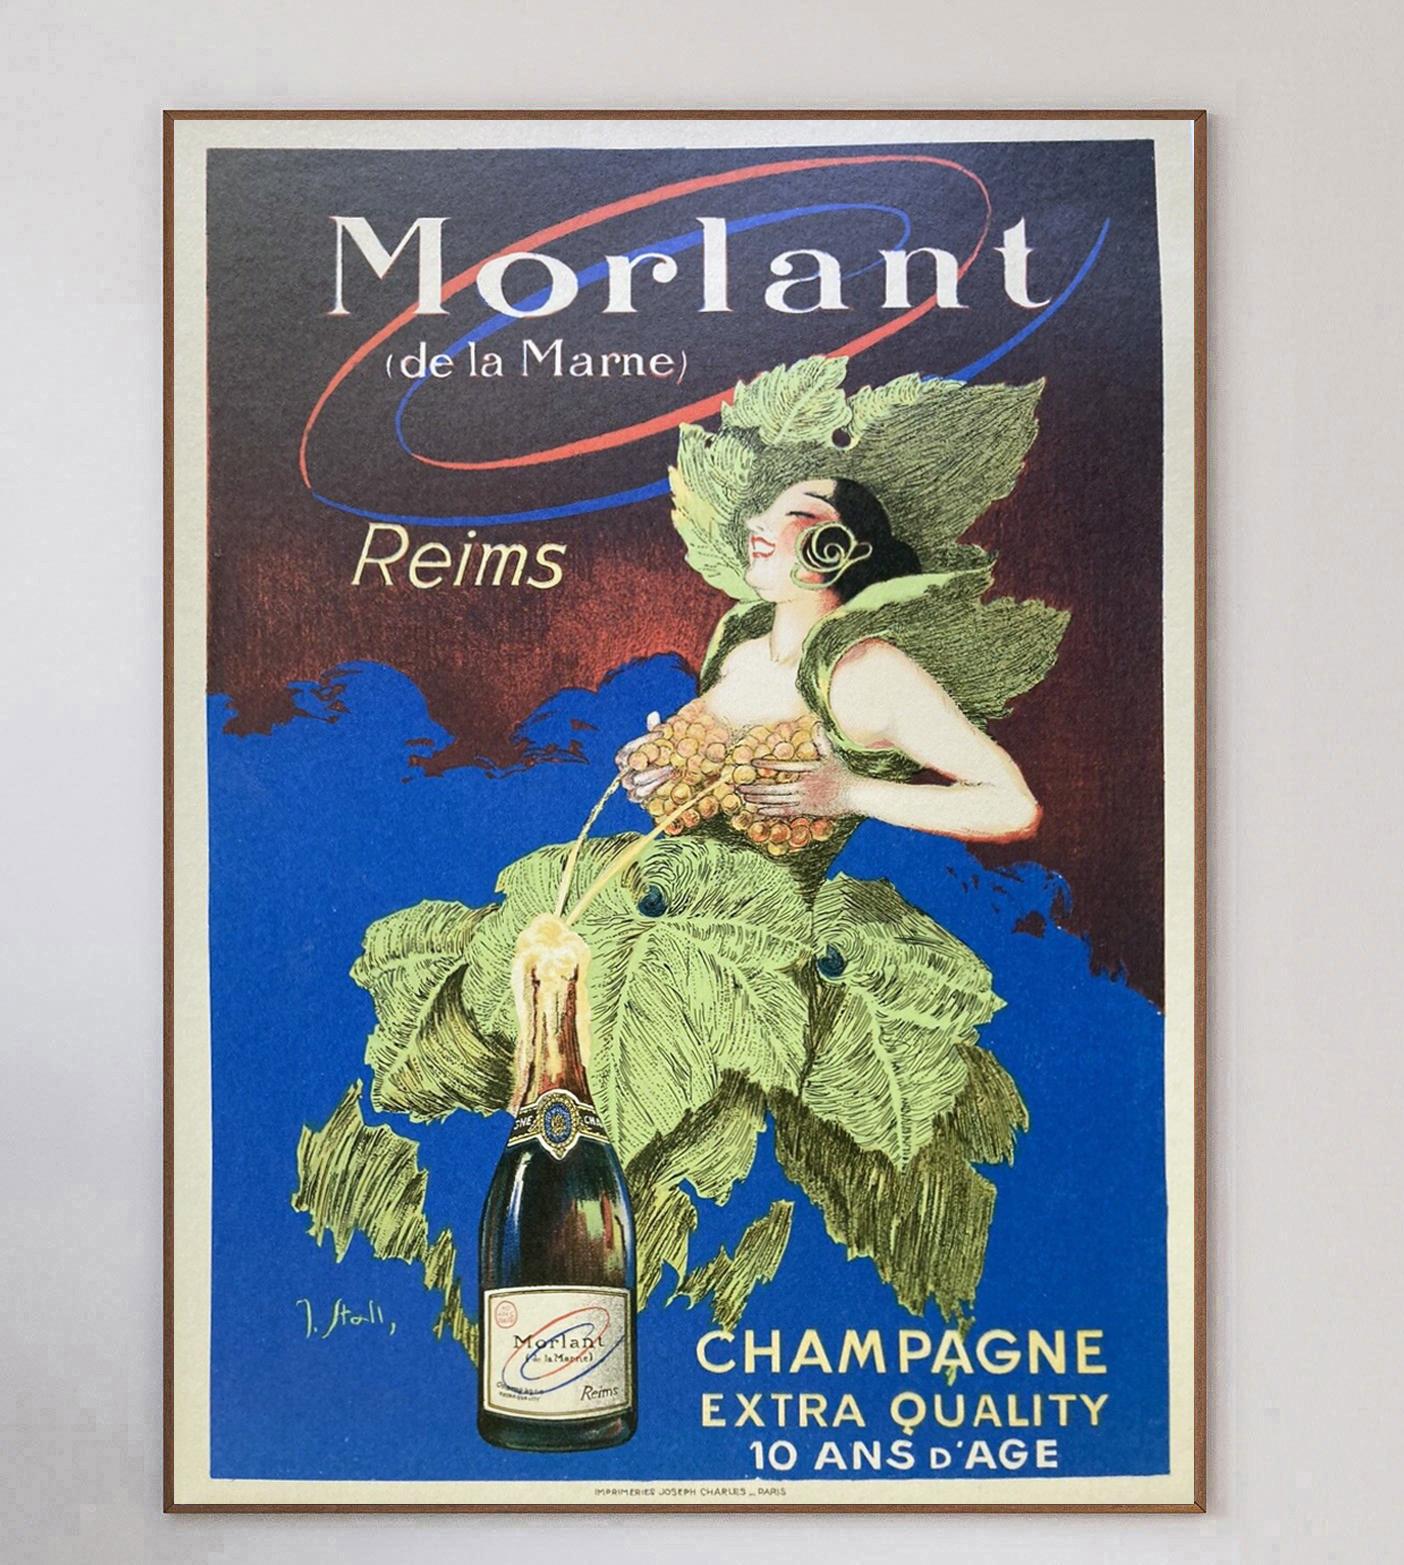 Beautiful poster for Morlant, the French Champagne of Reims in Marne, France. Featuring stunning artwork from J. Stall, this early 20th century poster depicts a woman as a grapevine filling up the bottle of the 